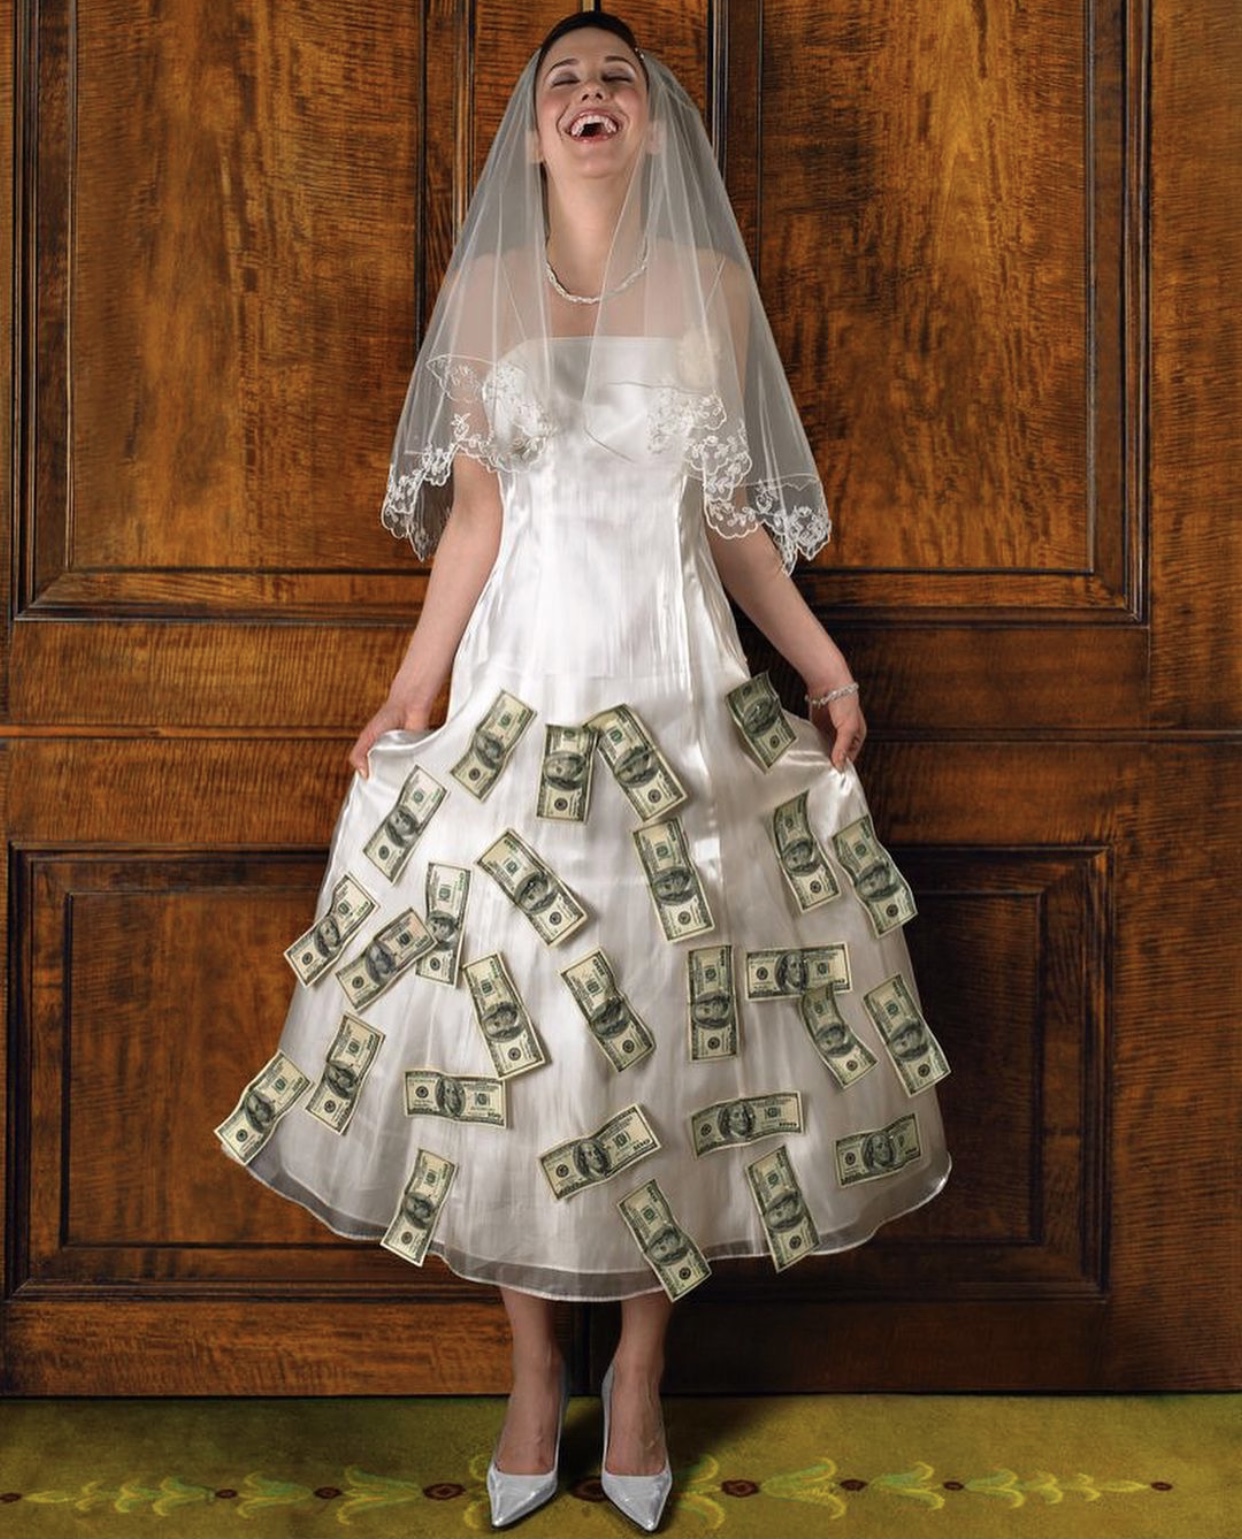 Bride wearing a satin ankle length wedding dress with an organza overlay and an elbow length veil trimmed in lace tilts her face to the sky laughing. She has $100 dollar pills pinned all over the skirt of her dress. She is standing in front of a large wood door. 